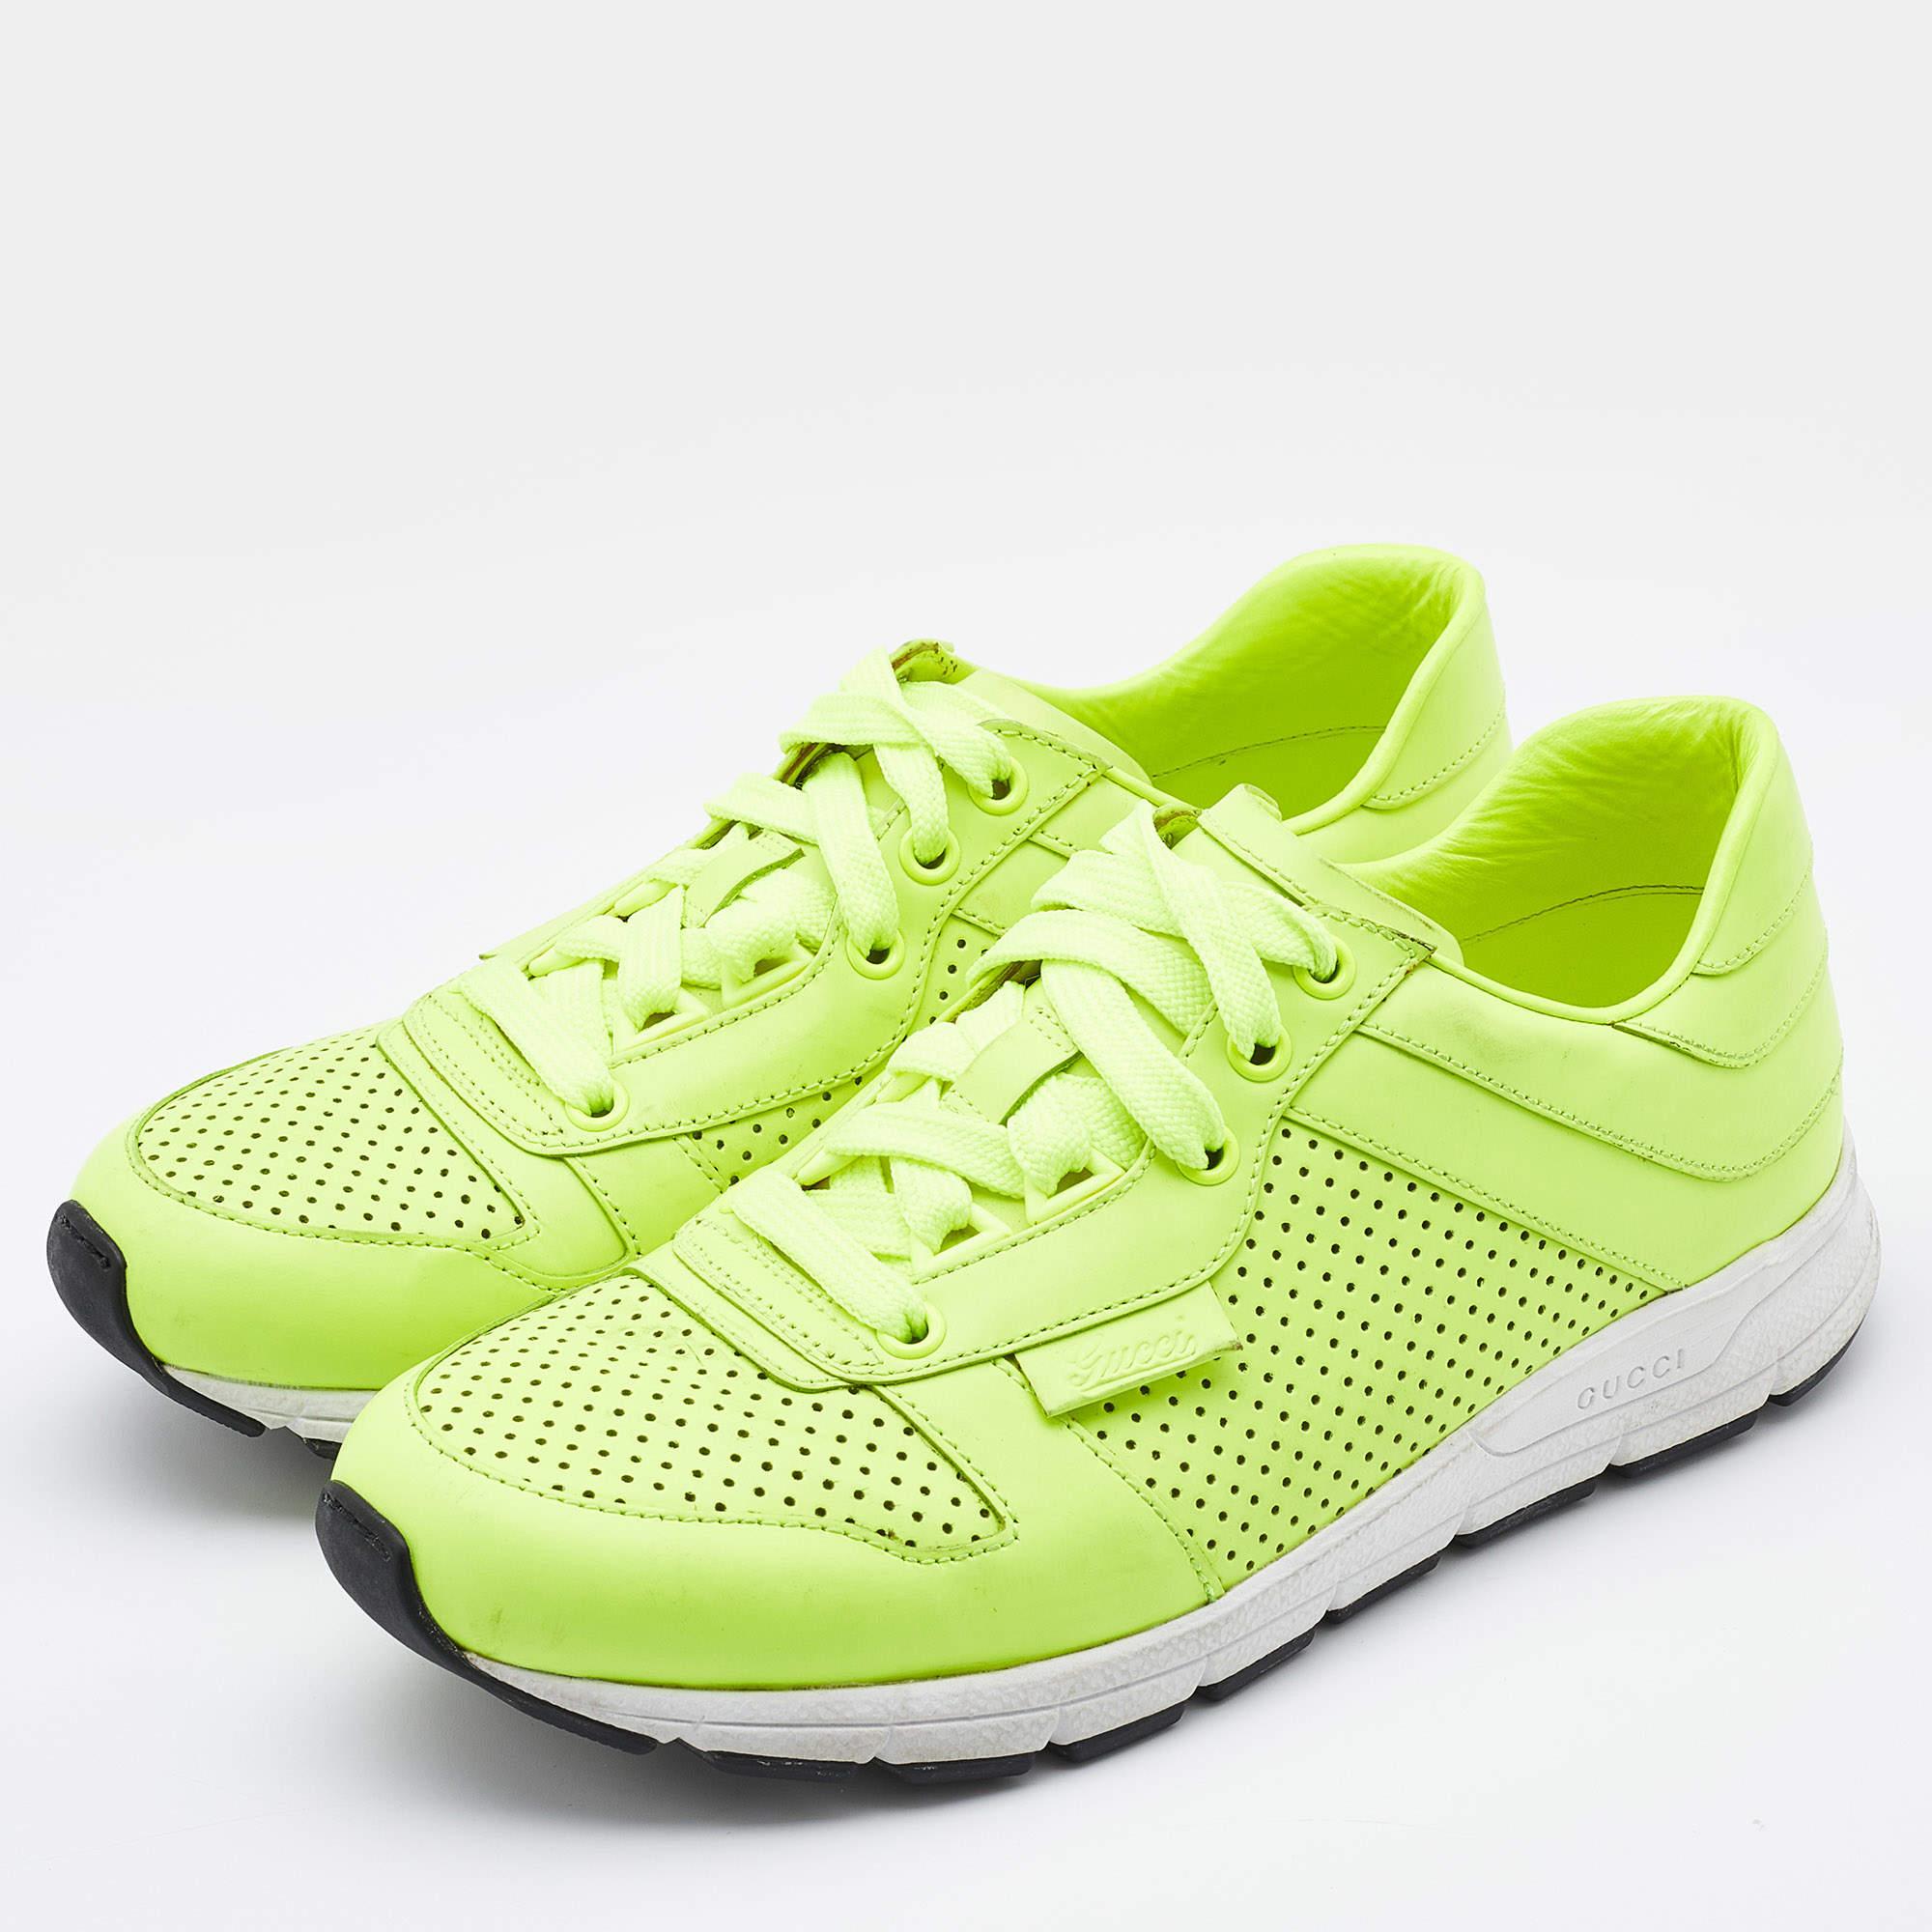 Gucci Neon Green Perforated Leather Lace Up Sneakers Size 38 In Good Condition For Sale In Dubai, Al Qouz 2